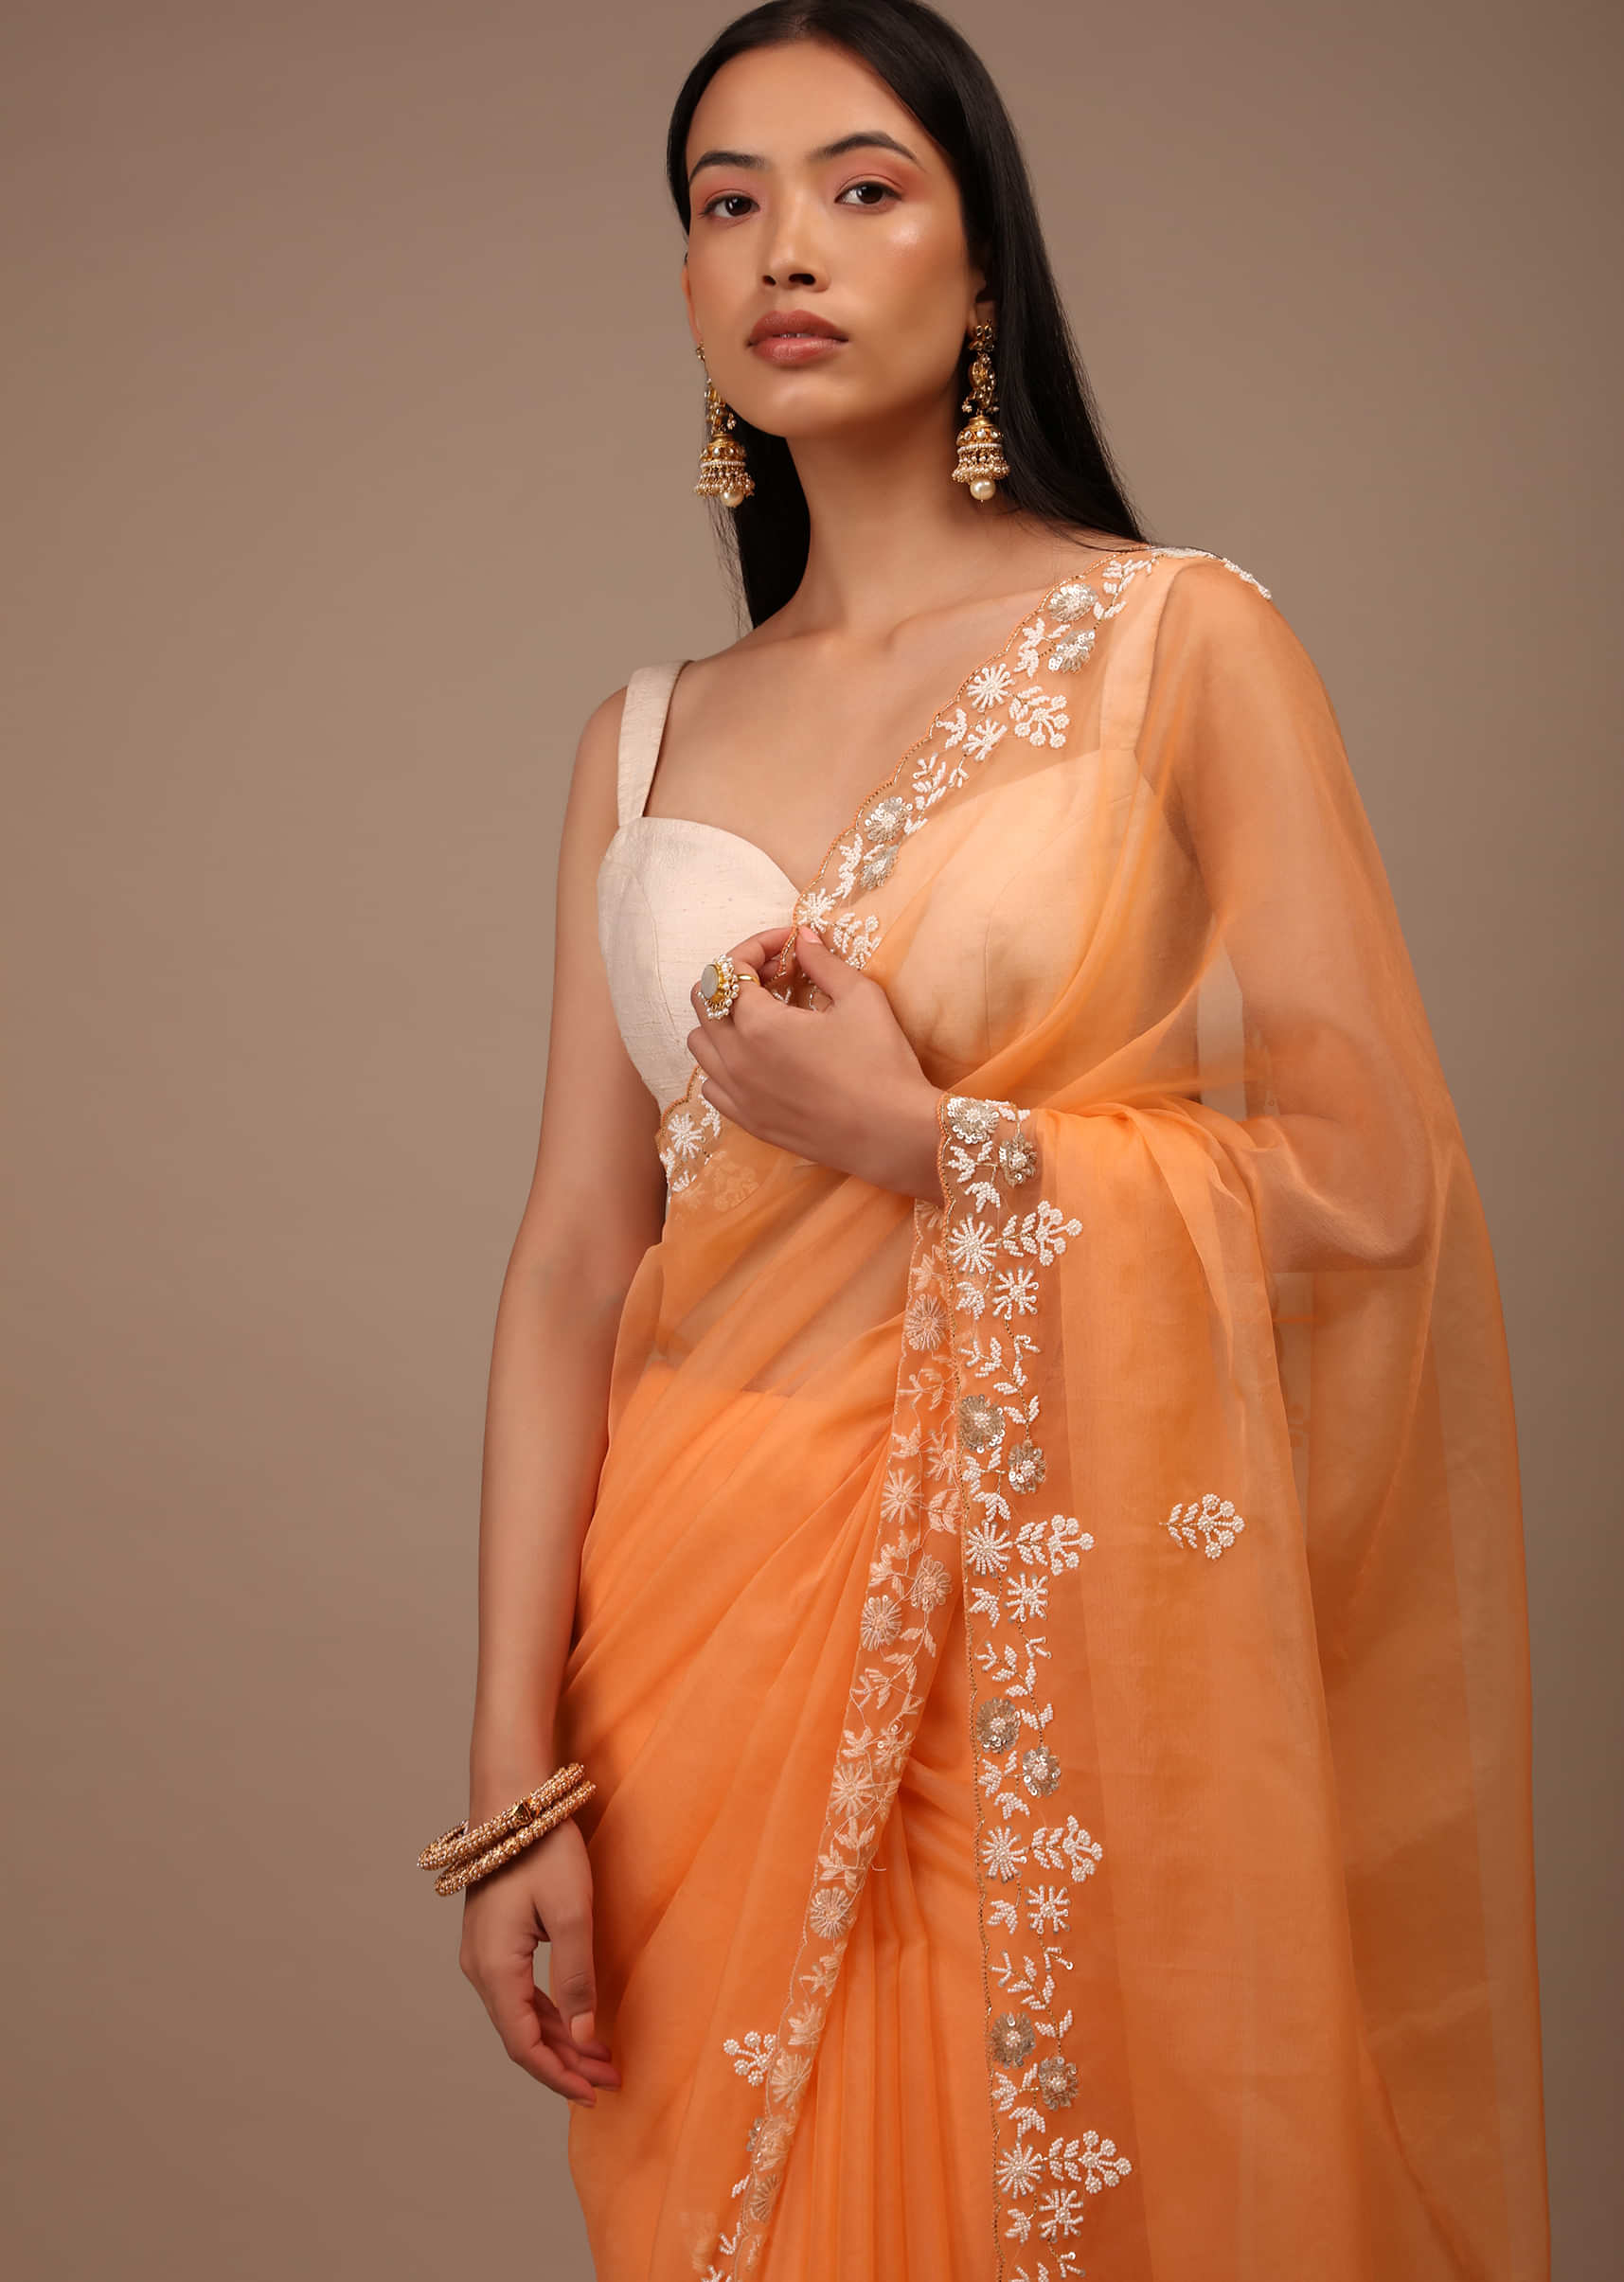 Melon Orange Saree In Organza With Hand Embroidered Moti And Sequin Work On The Border And Butti Design